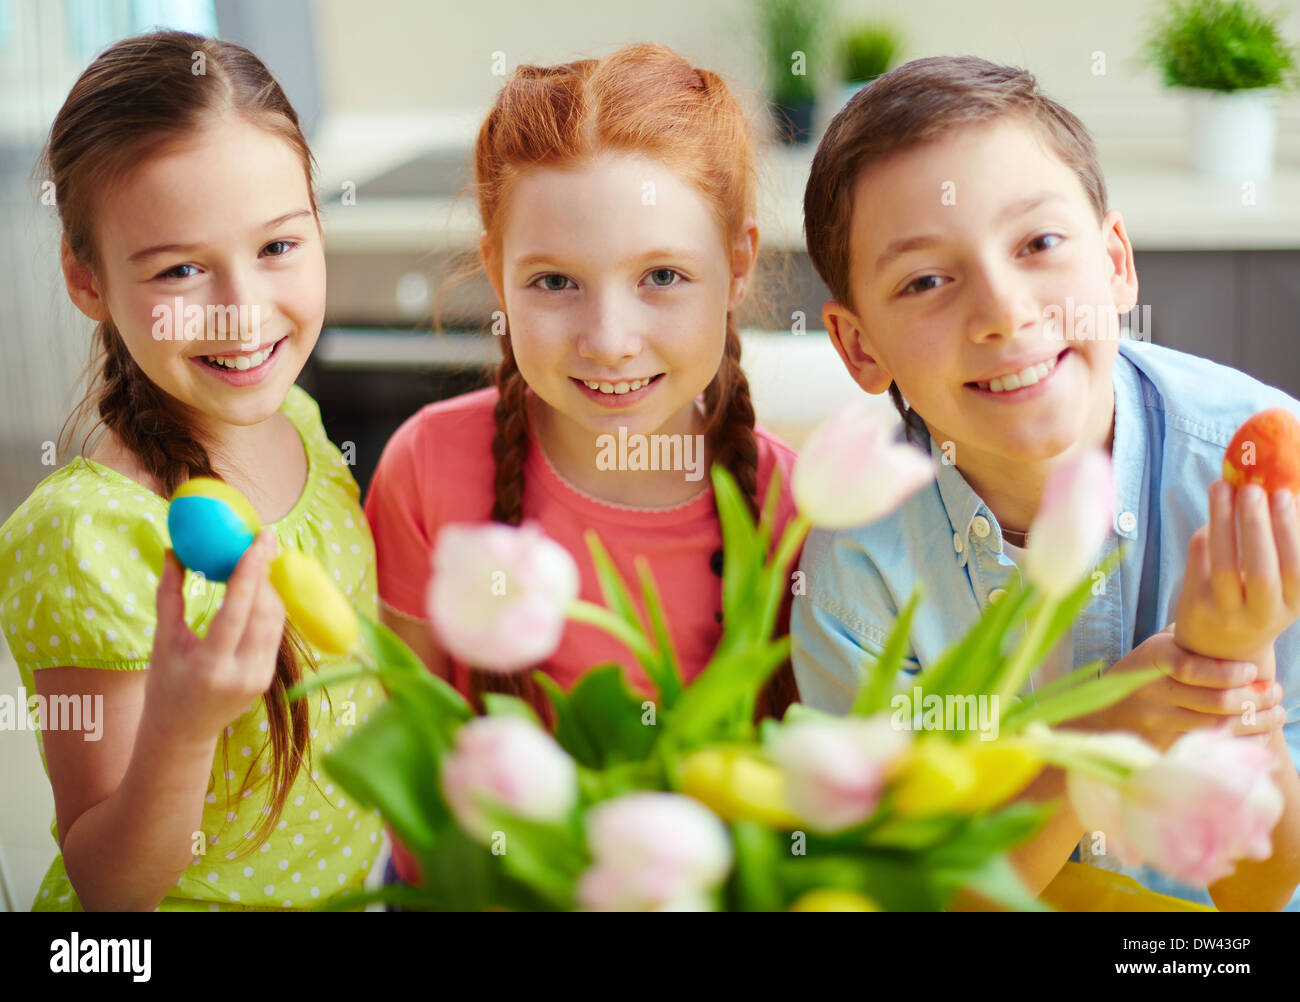 Portrait of three smiling children with Easter eggs Stock Photo